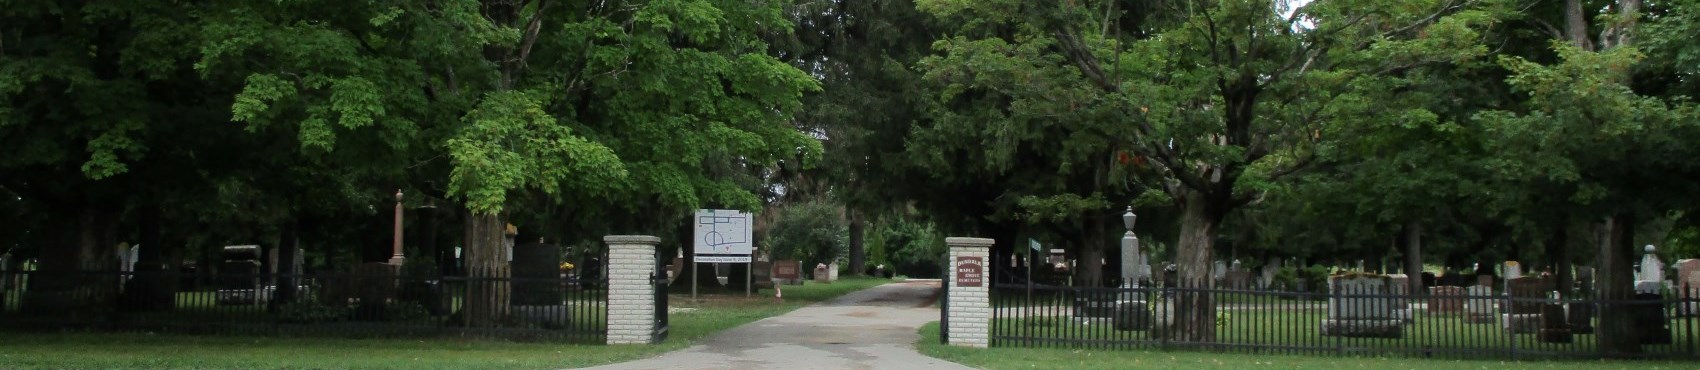 Picture of Maple Grove Cemetery Entrance